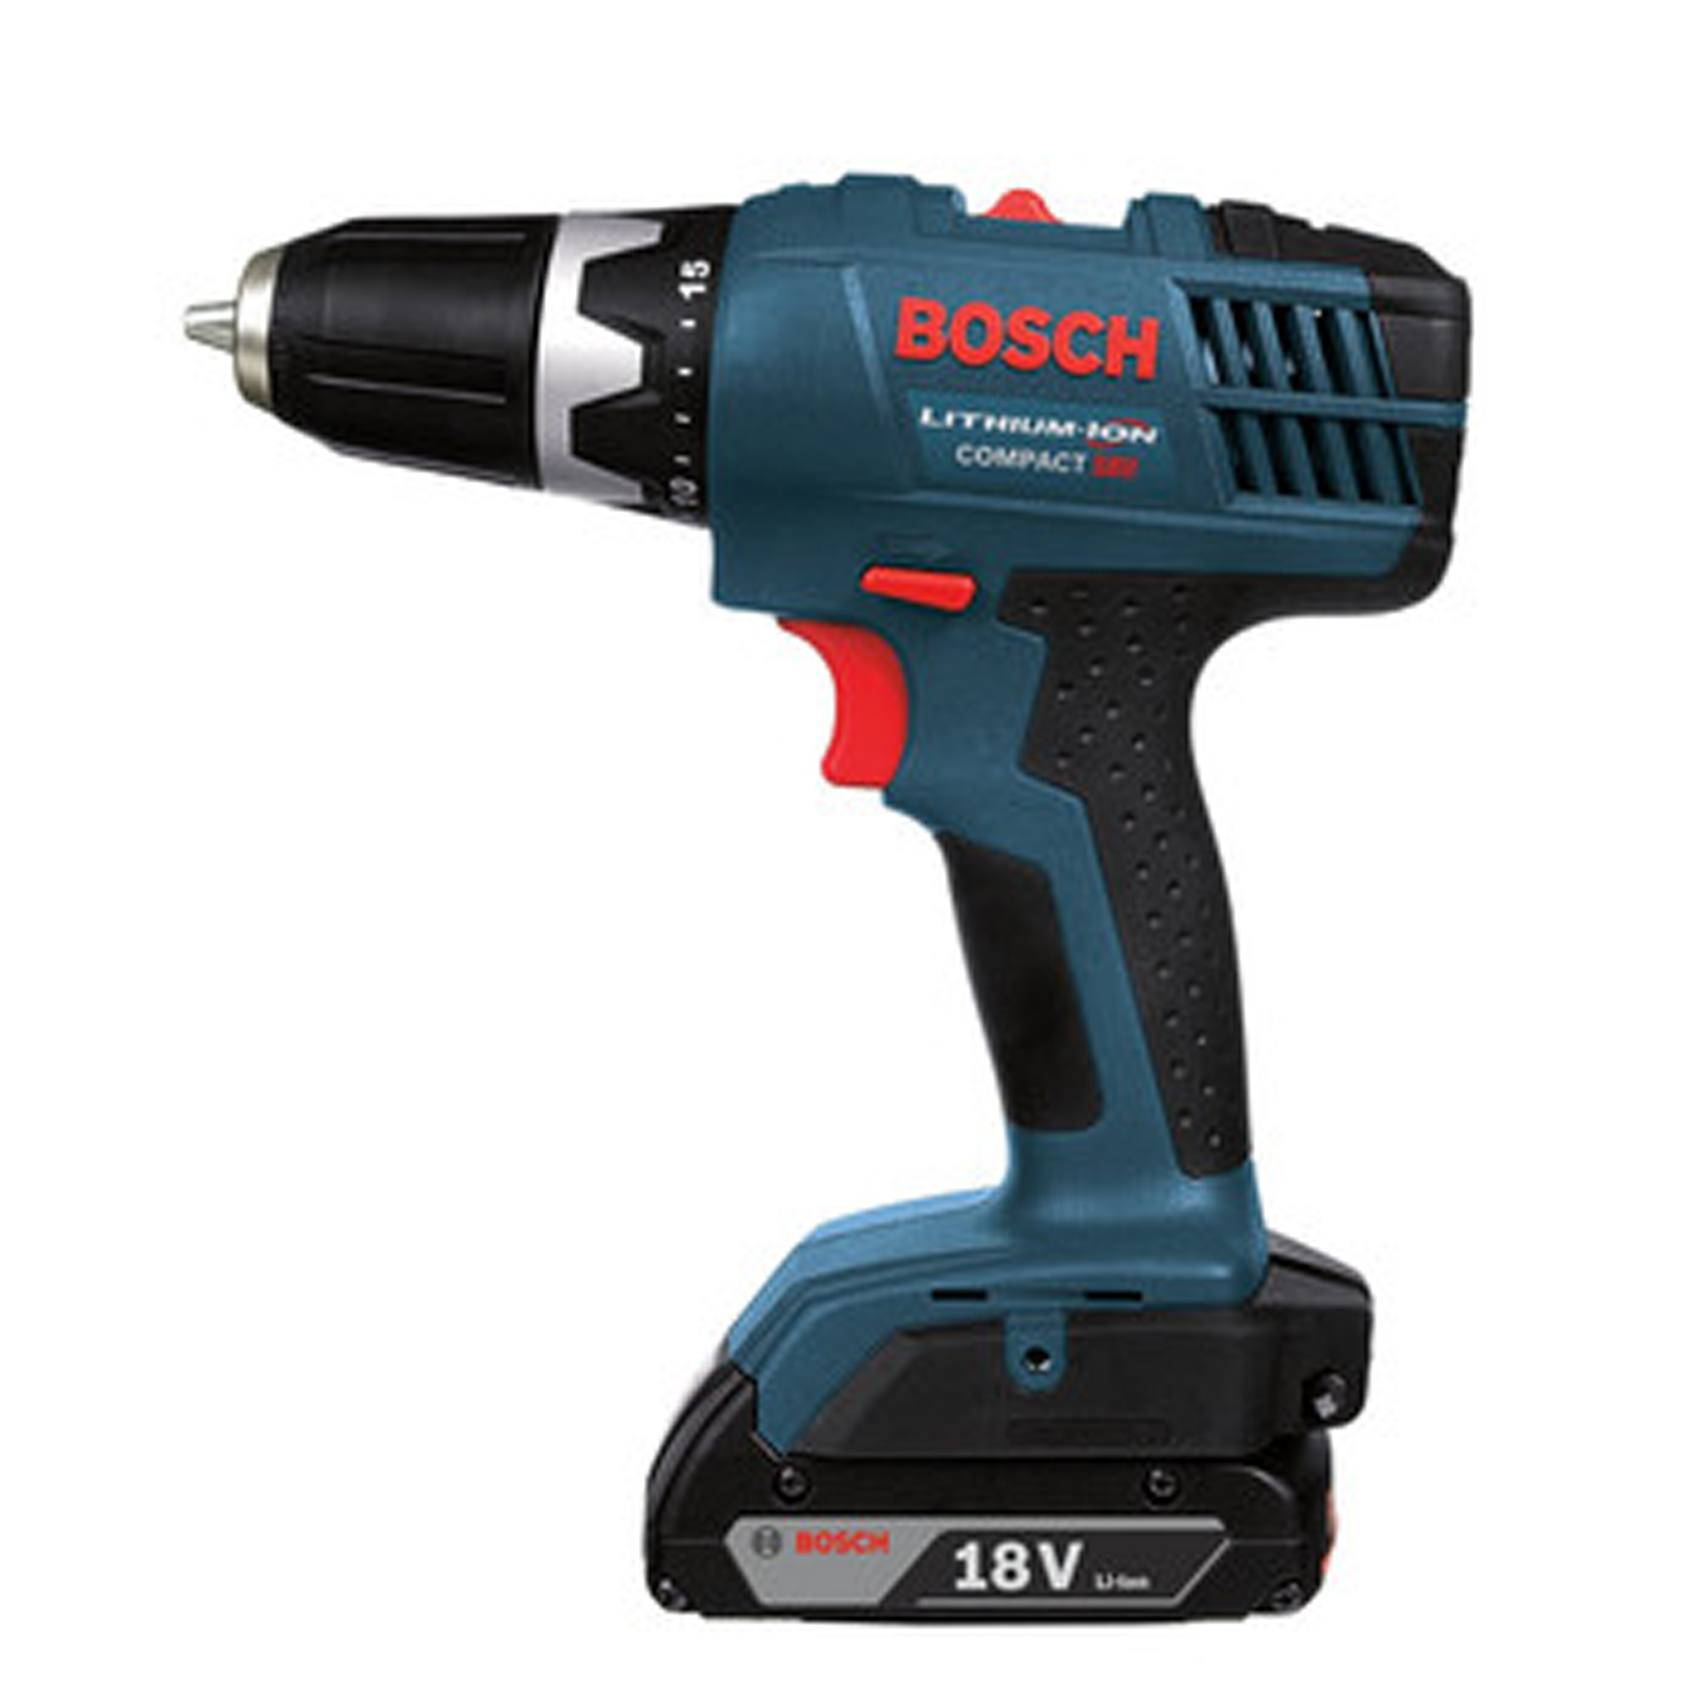 Factory-Reconditioned Bosch HDS180-03-RT 18V Cordless Lithium-Ion Compact Tough 1/2 in. Hammer Drill Driver with 2 Batteries